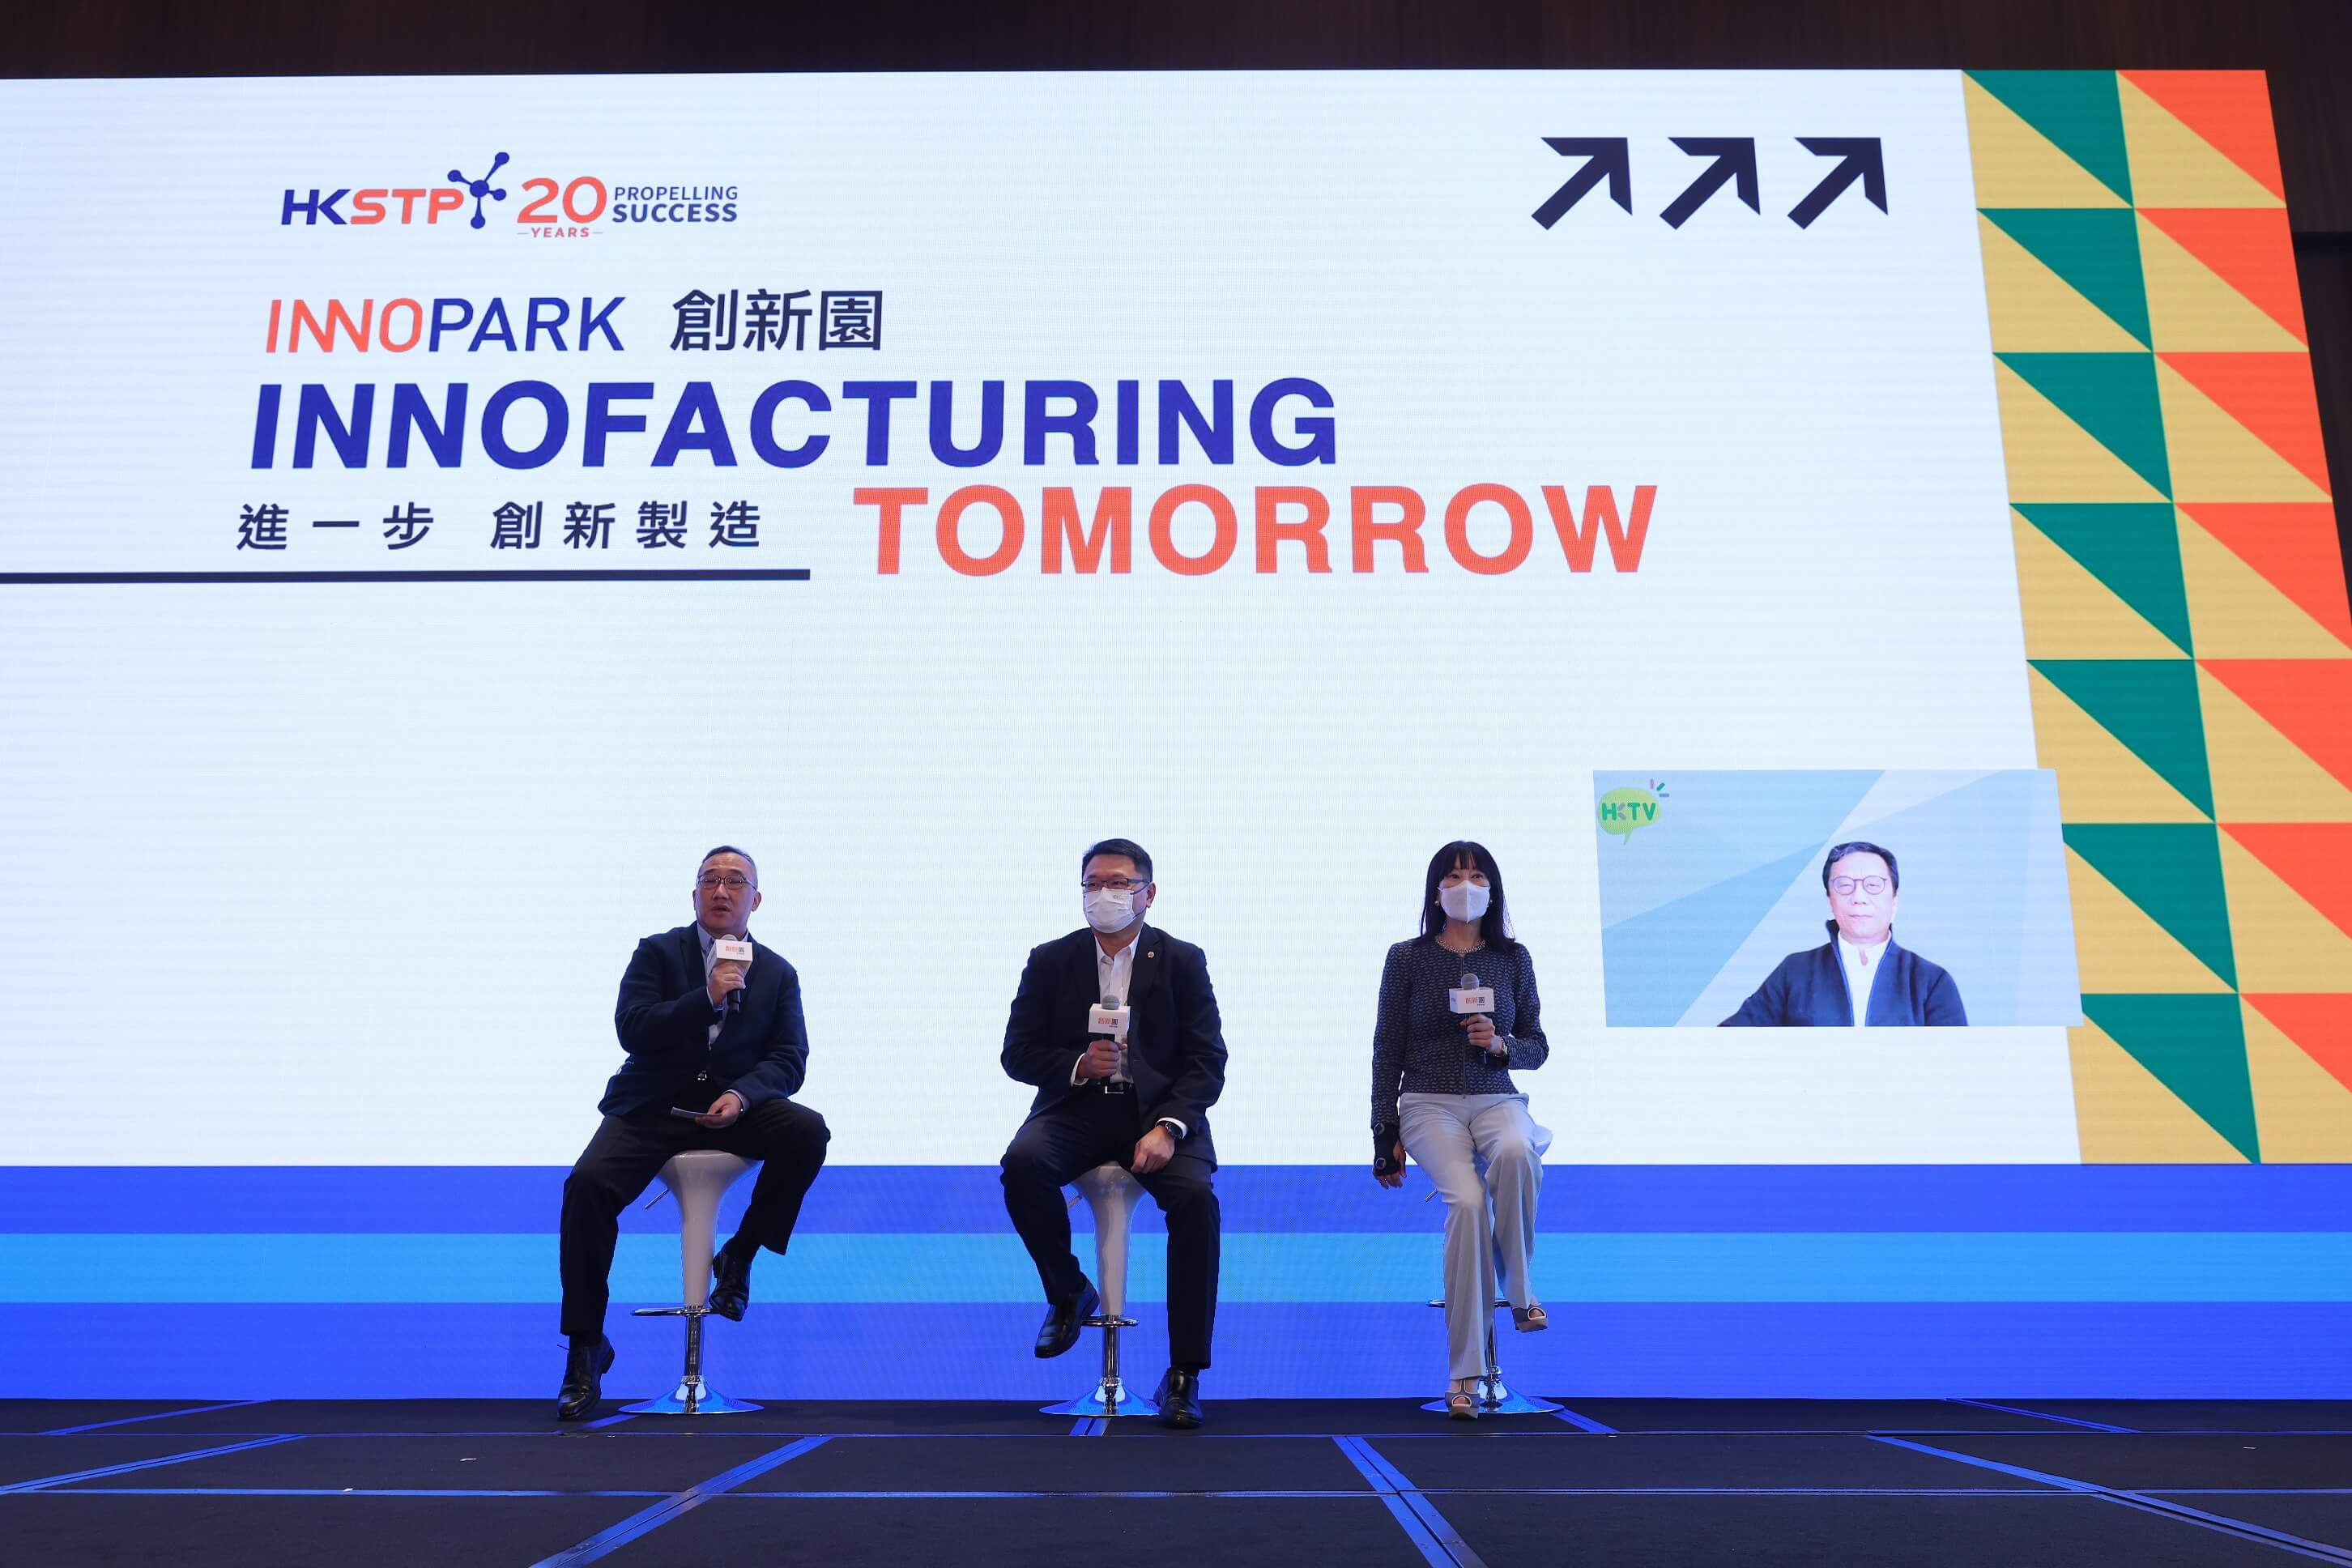 Photo 4&5: HKSTP hosted two fireside chats with industrial veterans and the next generation of innofacturers to discuss how INNOPARK drives a new era of economic growth and I&T opportunities.